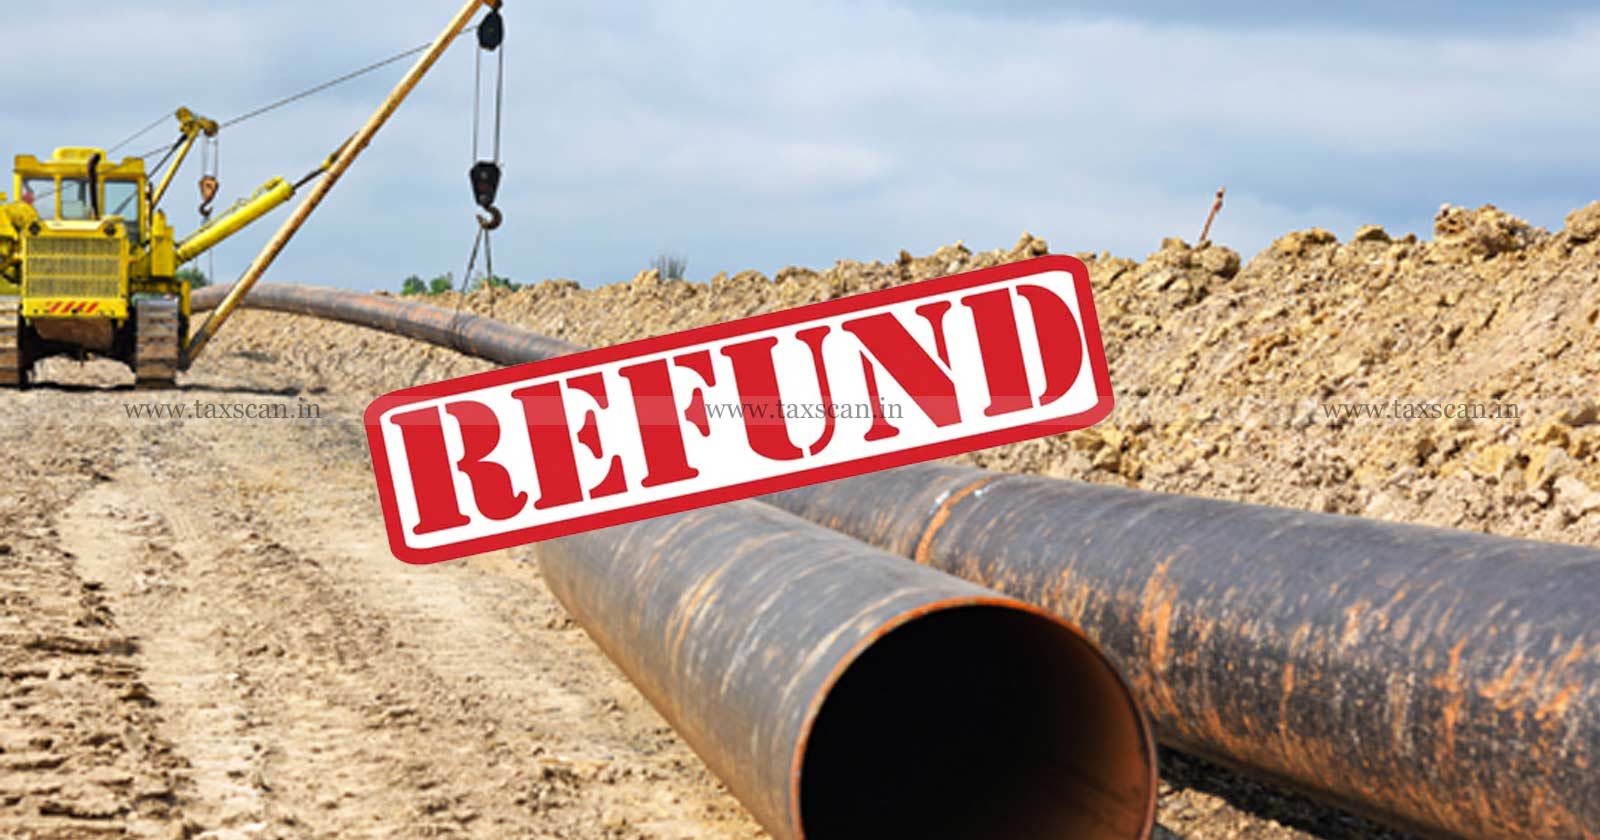 Refund - Refund on trenching pipeline - trenching pipeline - SEZ - CESTAT - taxscan